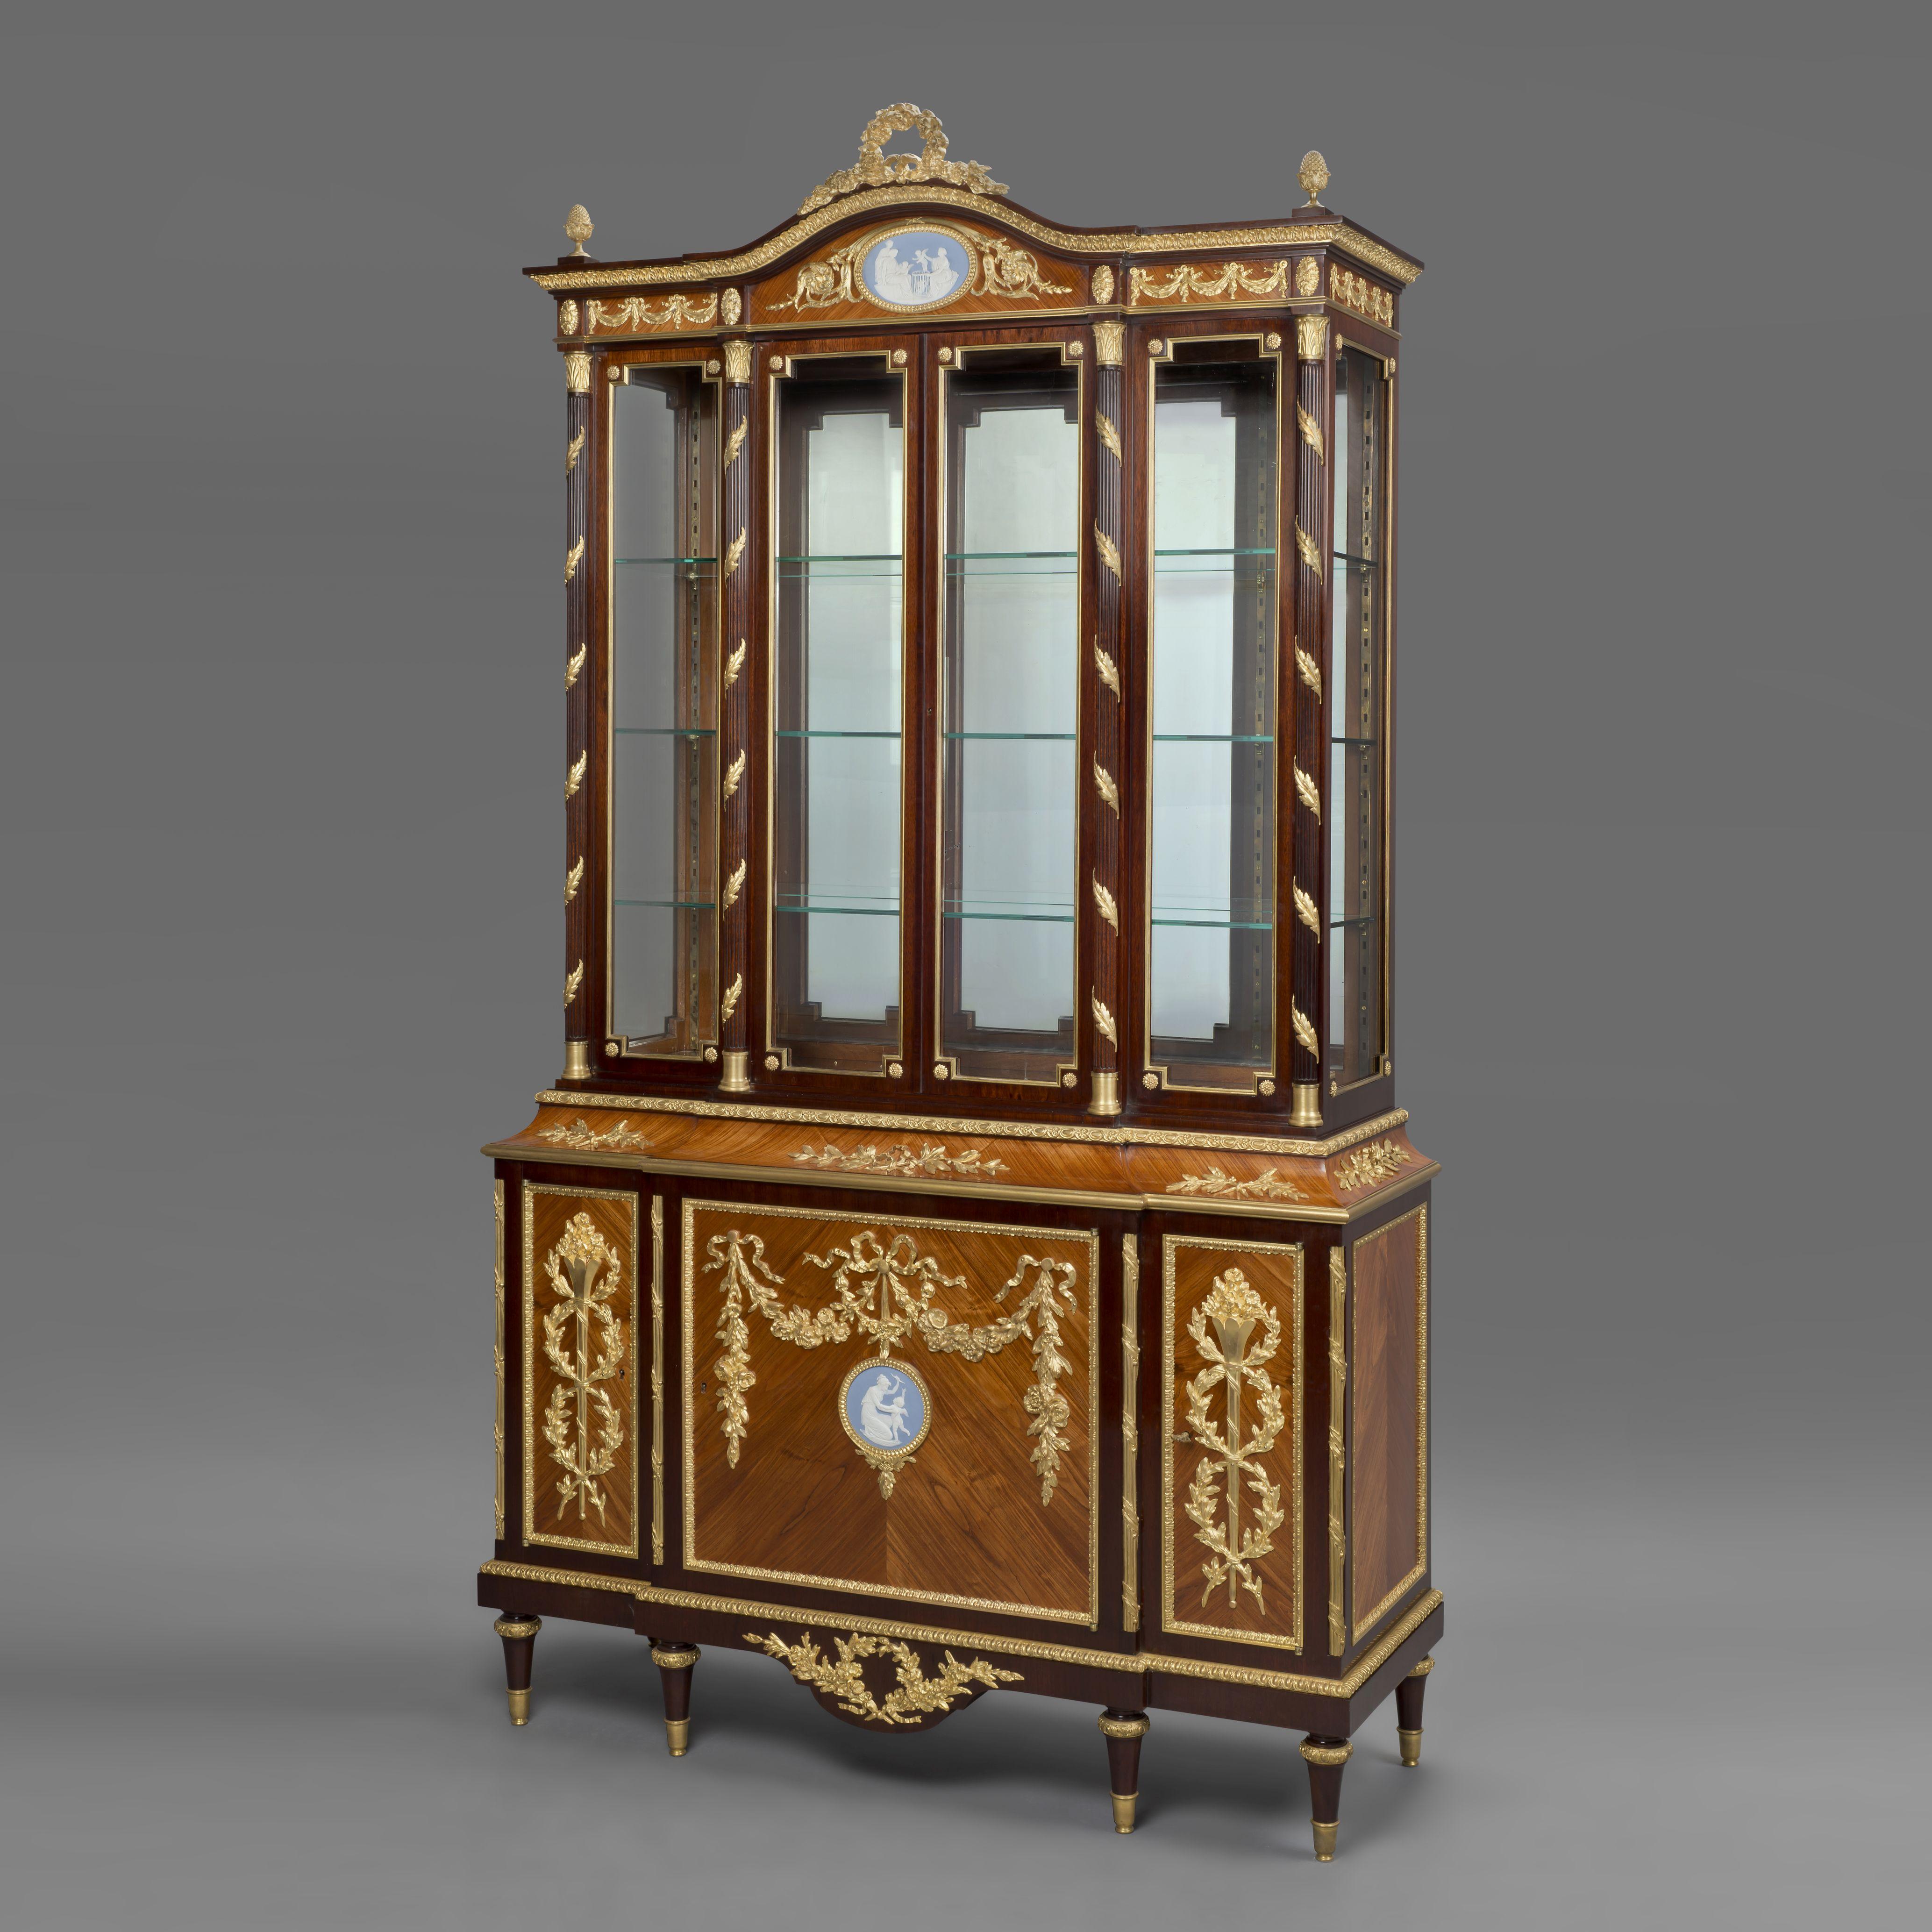 A Fine Louis XVI Style Gilt-Bronze Mounted Mahogany Display Cabinet With Wedgwood Porcelain Plaques.

The upper section has a shaped cornice with acorn finials and a foliate wreath above a frieze centred by a large oval Wedgwood porcelain plaque. 